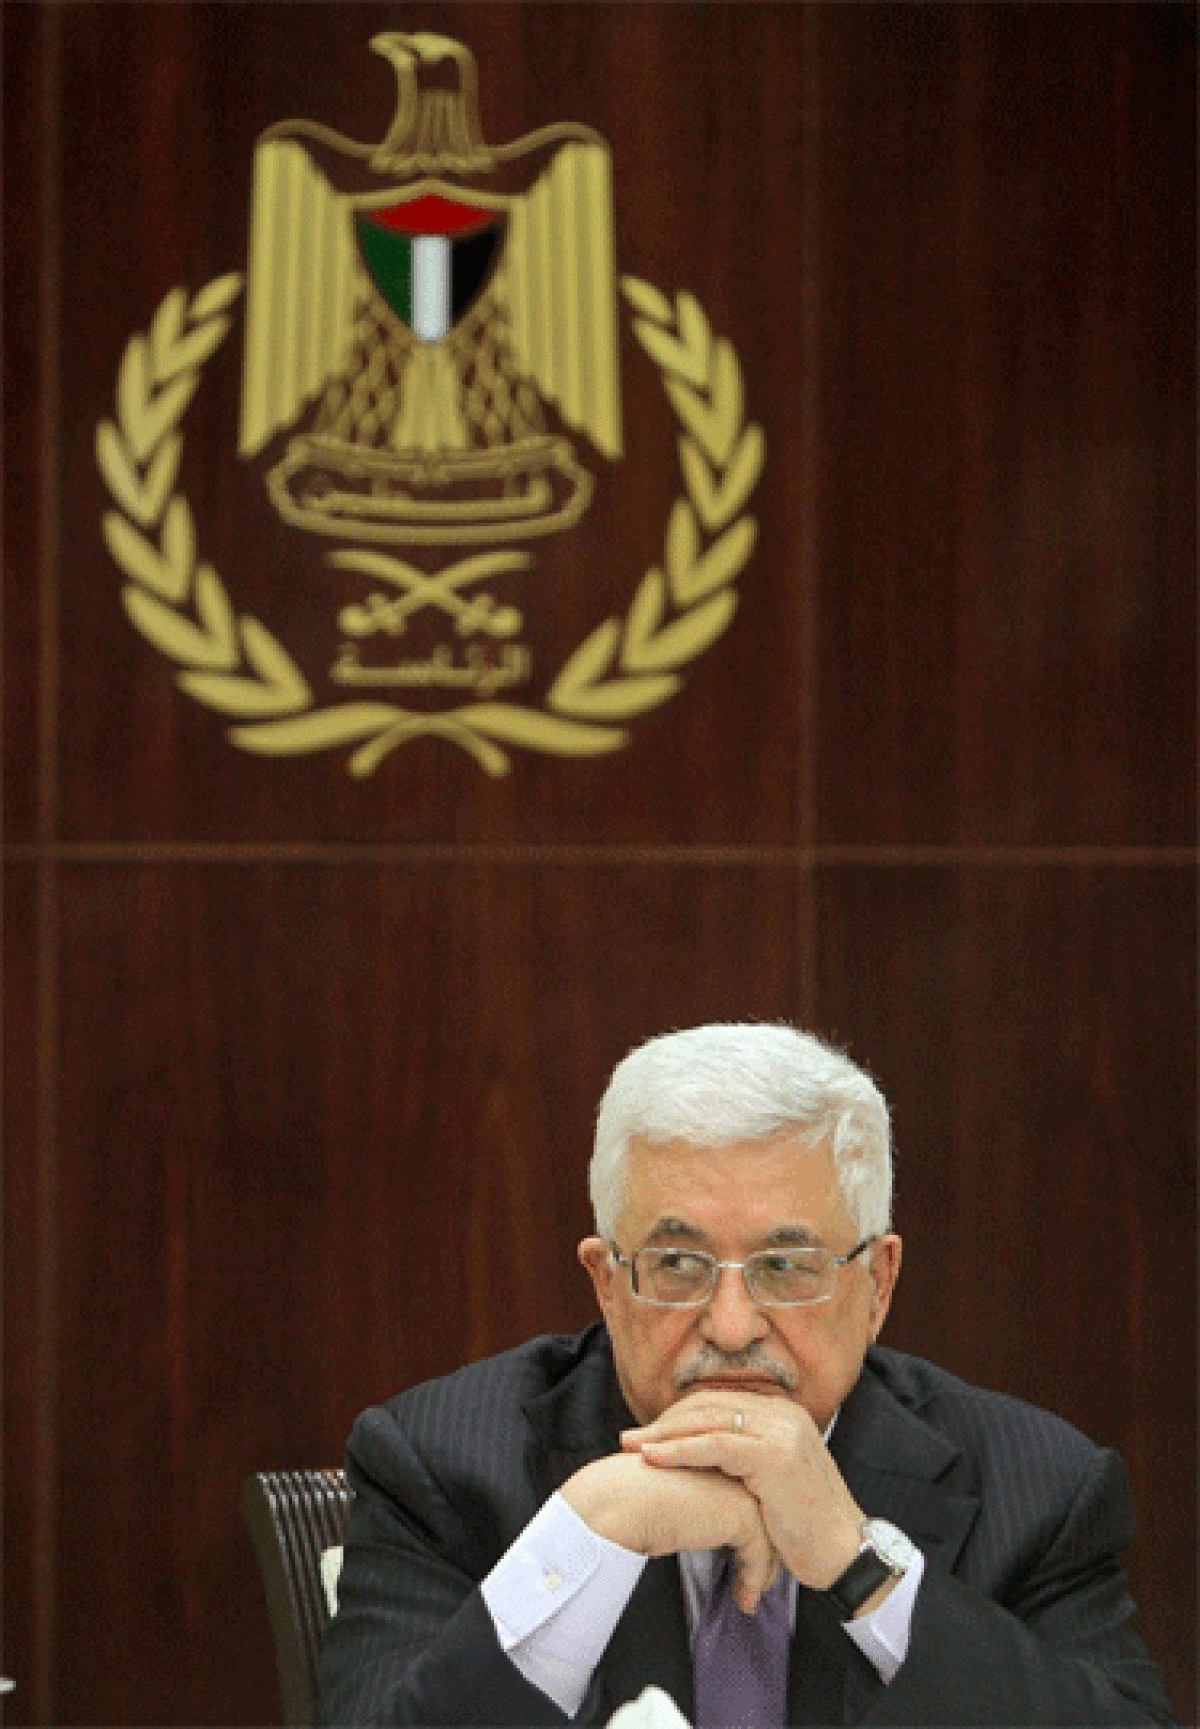 Palestinian Authority President Mahmoud Abbas presides over a meeting of the executive committee of the PLO, Palestinian Liberation Organizations, at his headquarter in the West Bank town of Ramallah.